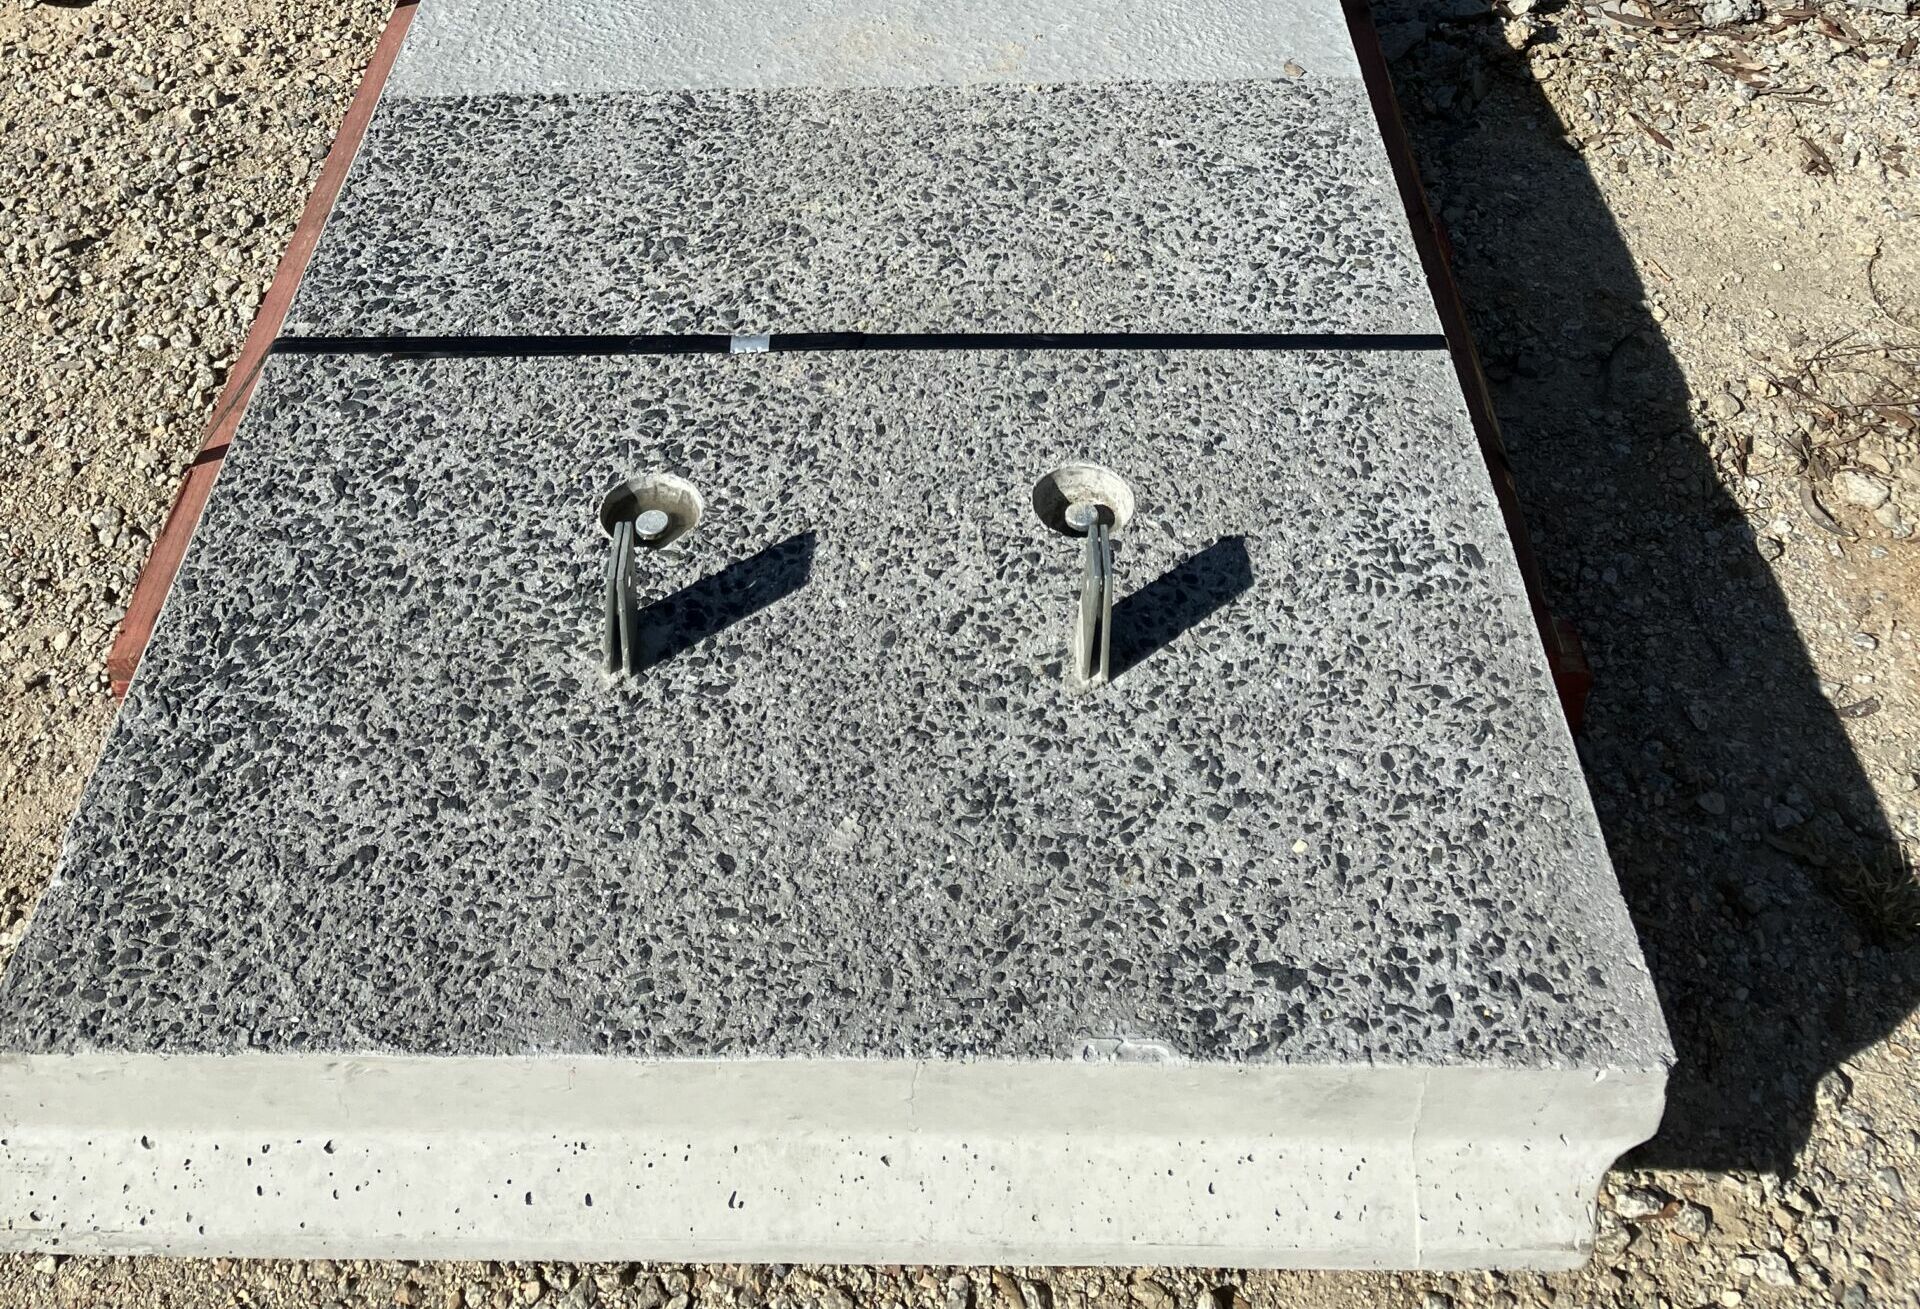 Plastic waste turned into eco-concrete aggregate mix then used to make concrete by Reinforced Earth Australia.